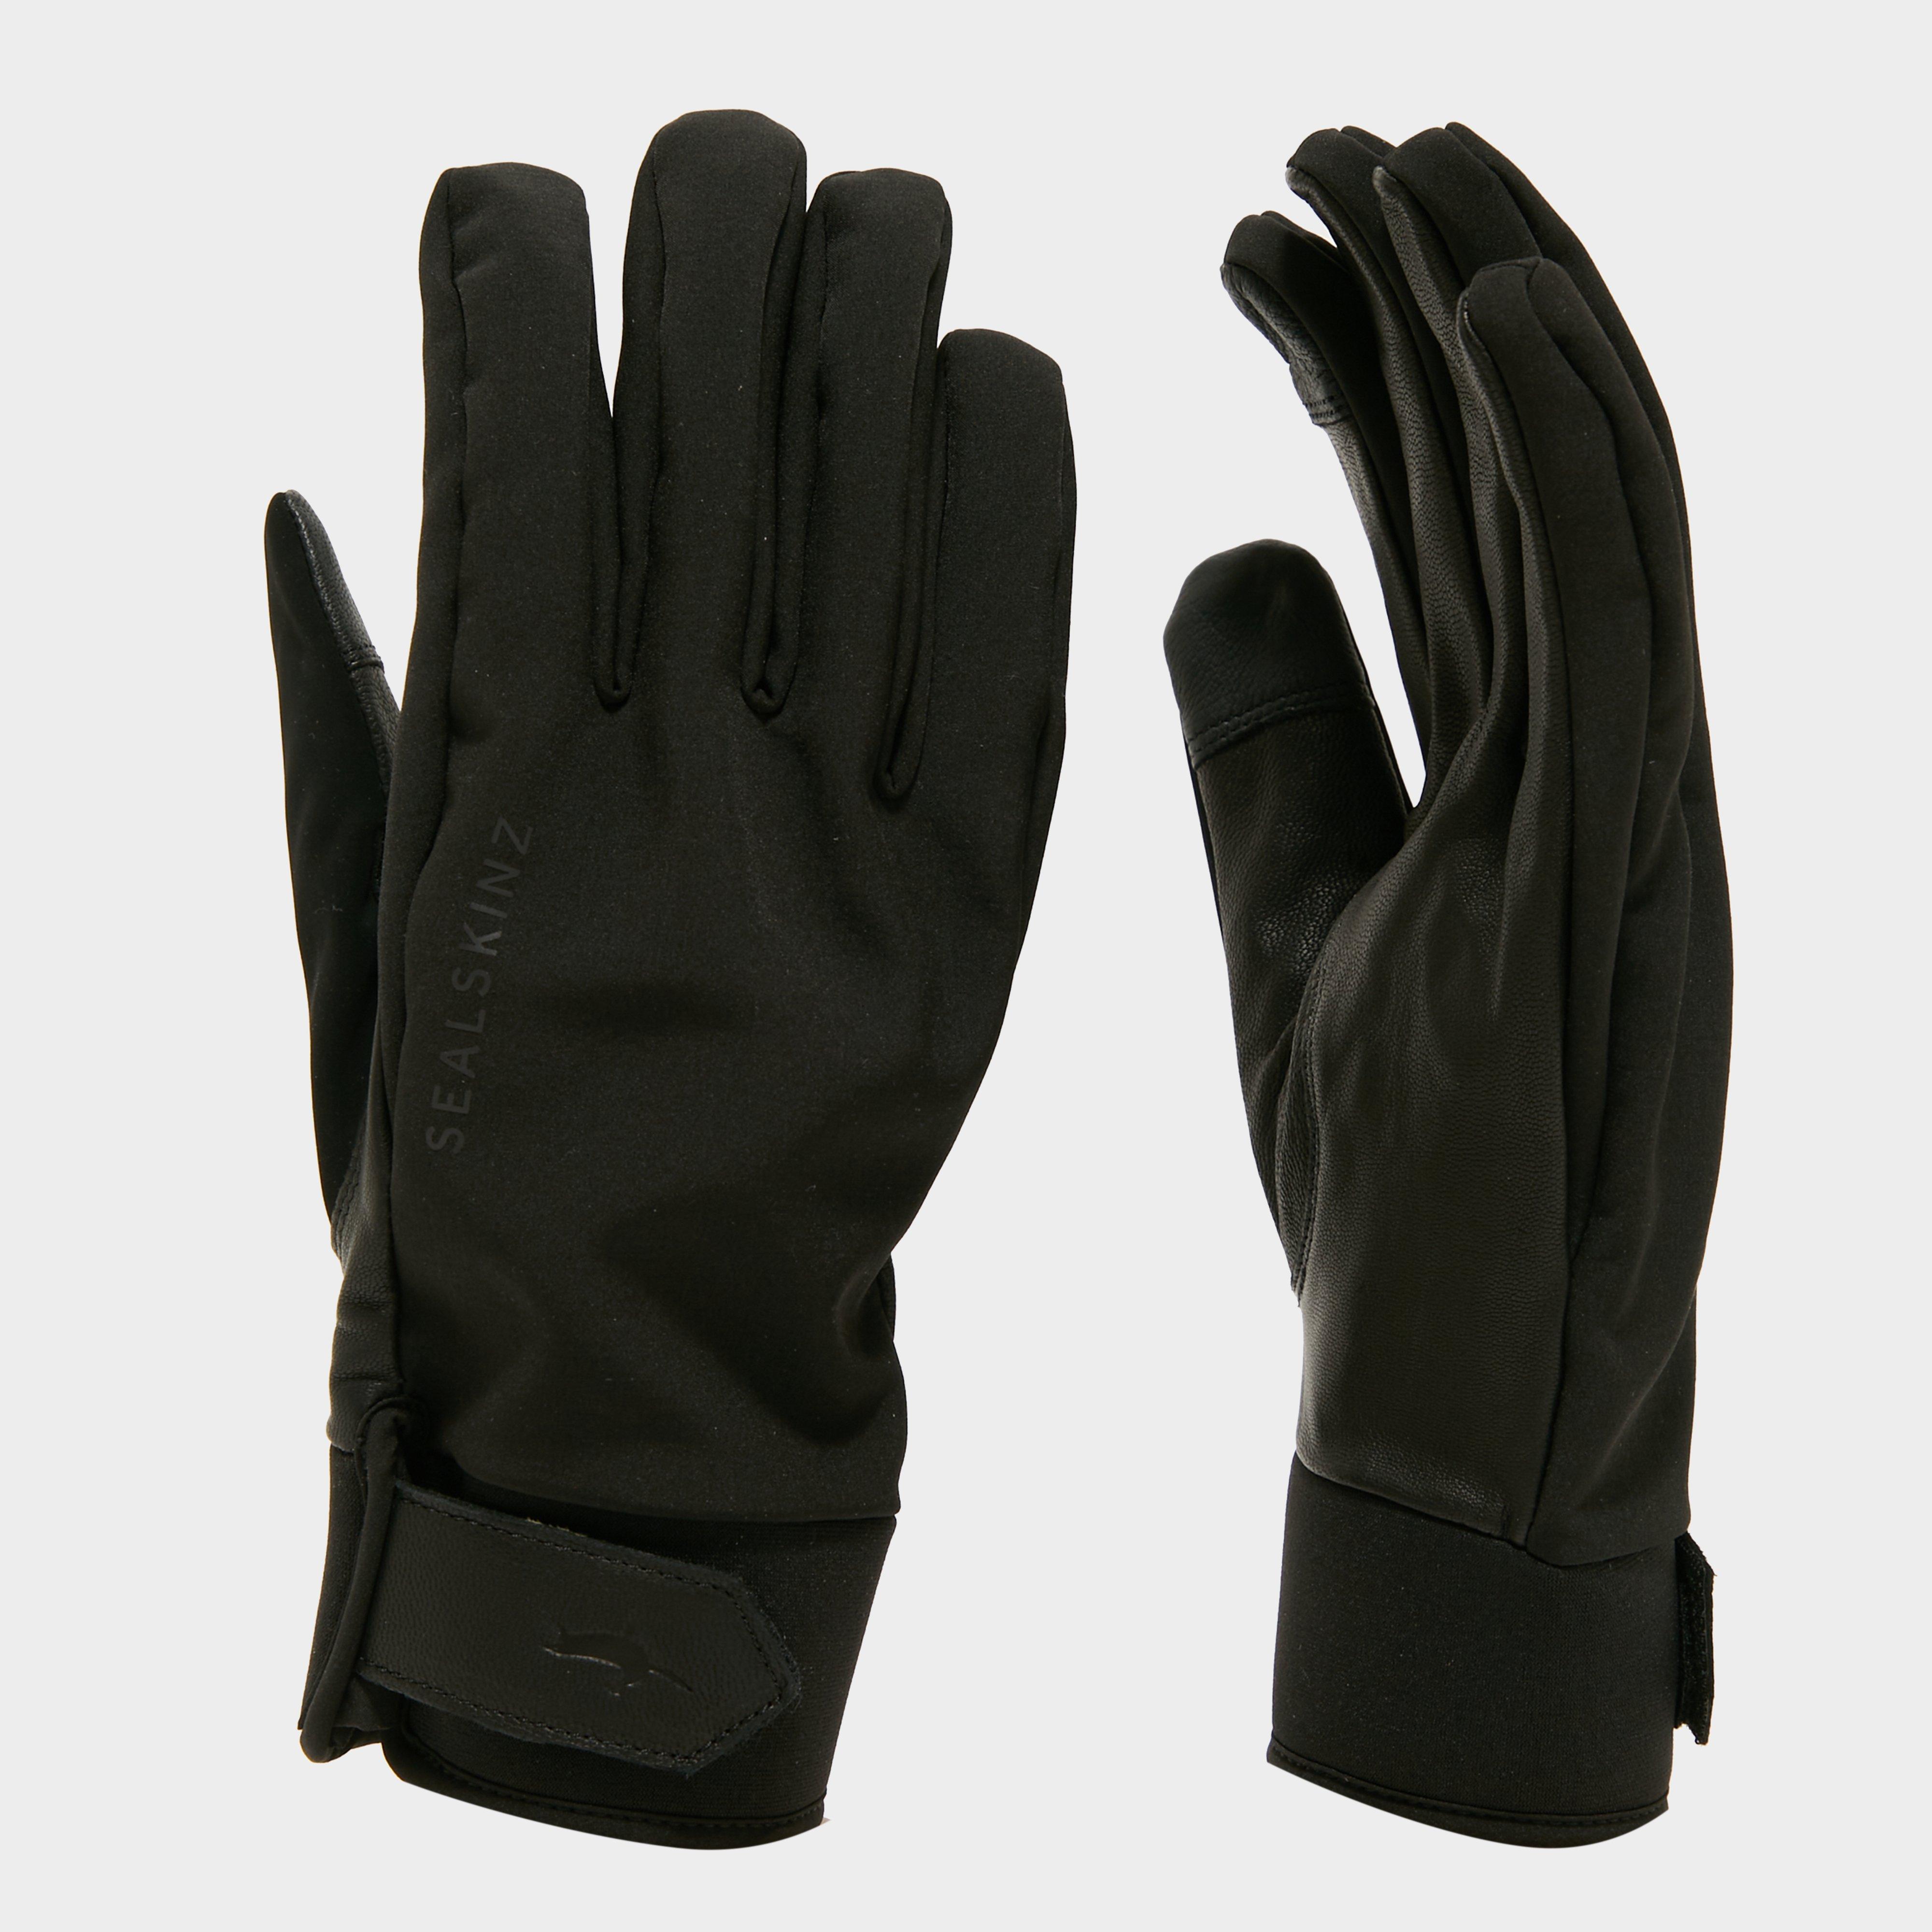 Photos - Other goods for tourism Waterproof Mens  Insulated Gloves - Black, Black 